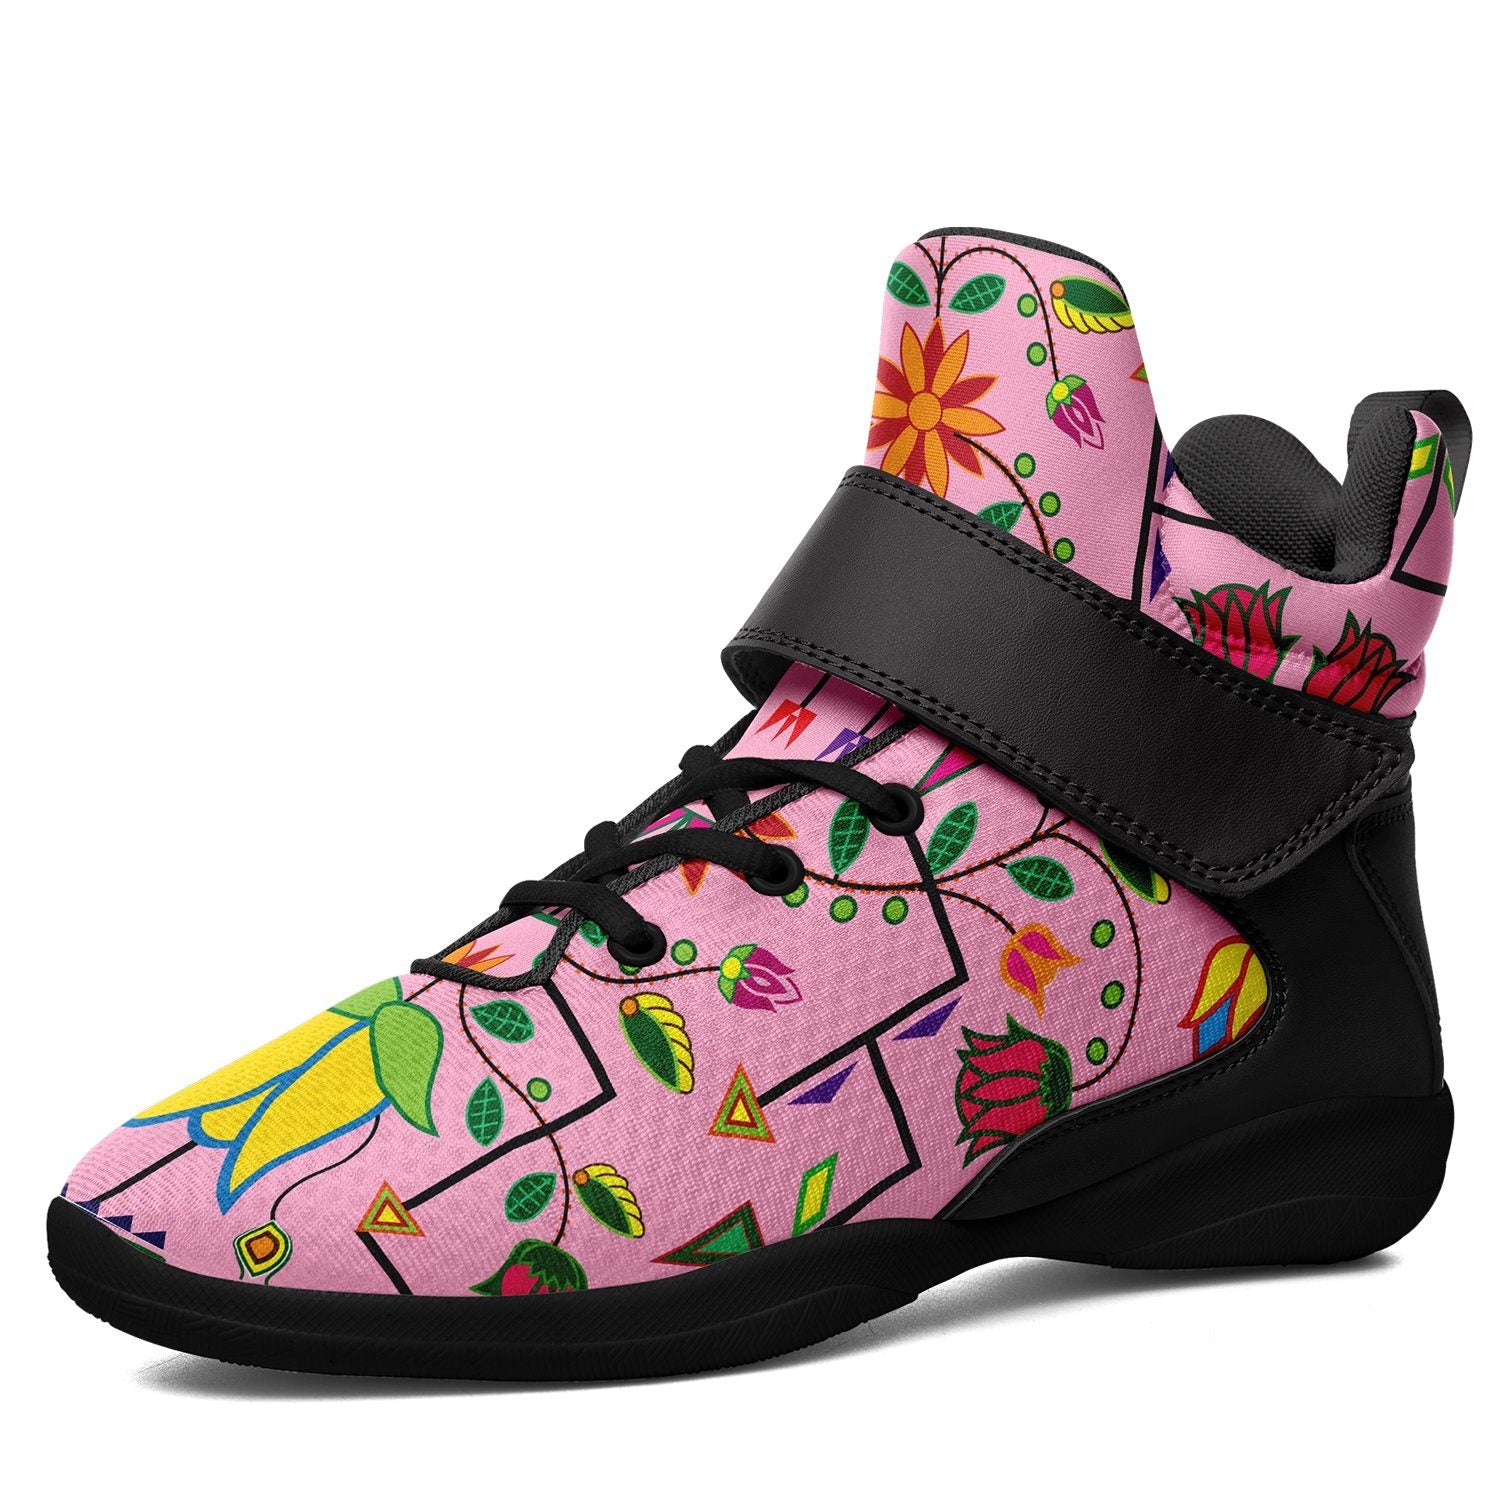 Geometric Floral Summer Sunset Ipottaa Basketball / Sport High Top Shoes 49 Dzine US Women 4.5 / US Youth 3.5 / EUR 35 Black Sole with Black Strap 